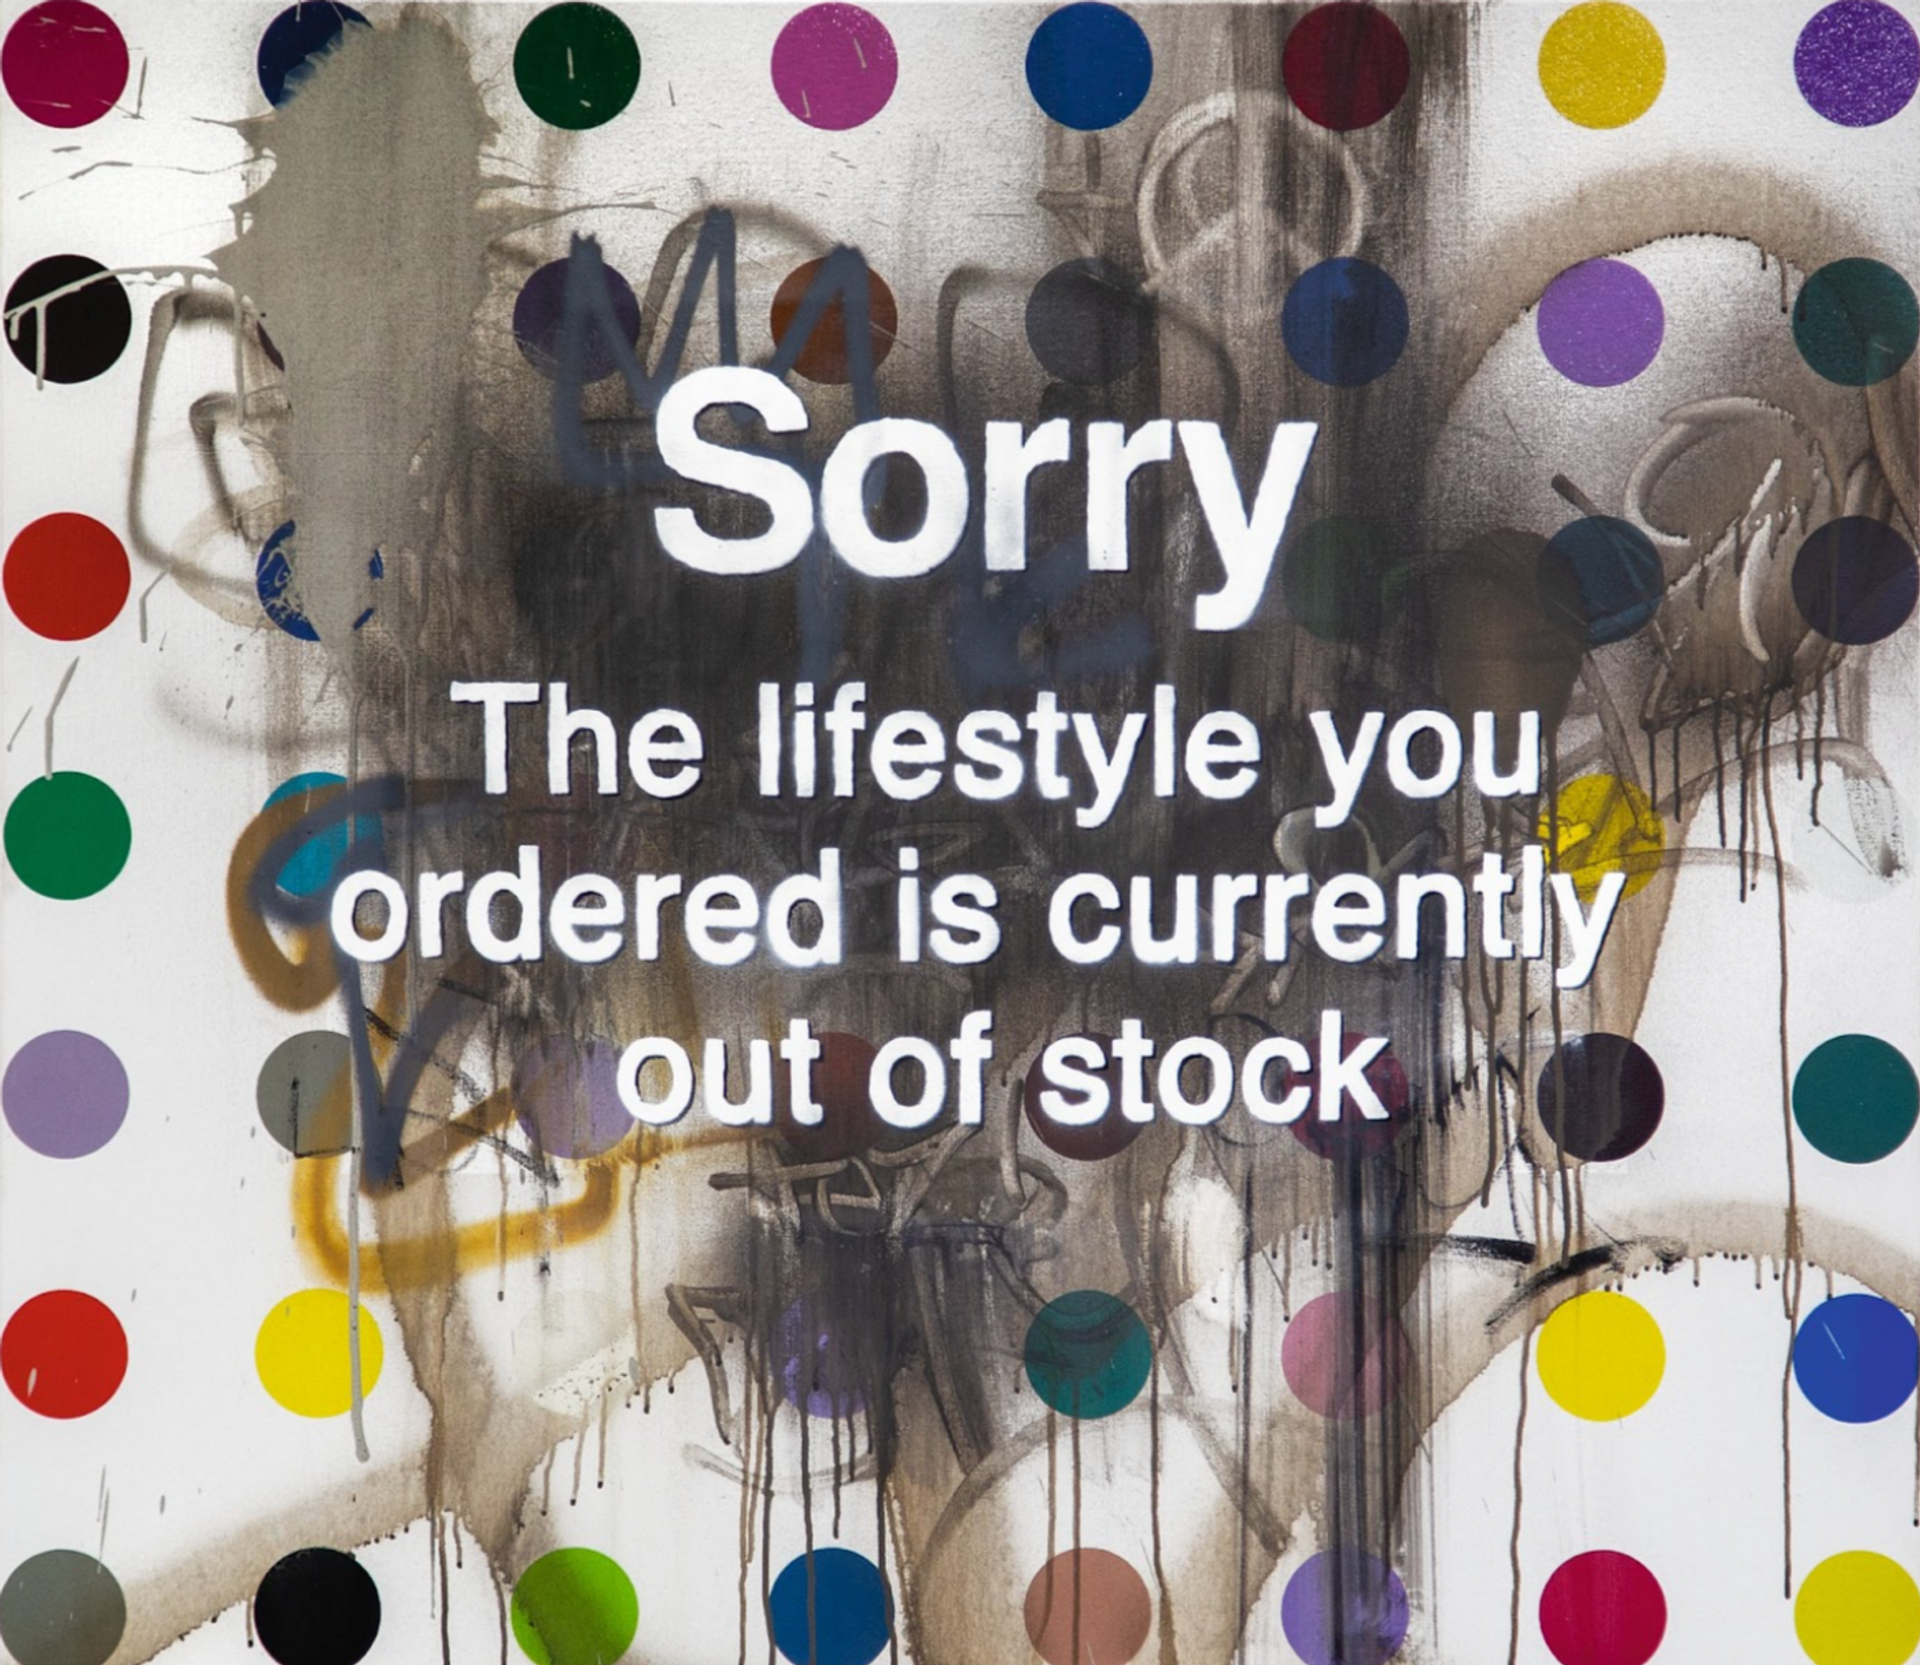 Sorry The Lifestyle You Ordered Is Currently Out Of Stock by Banksy and Damien Hirst